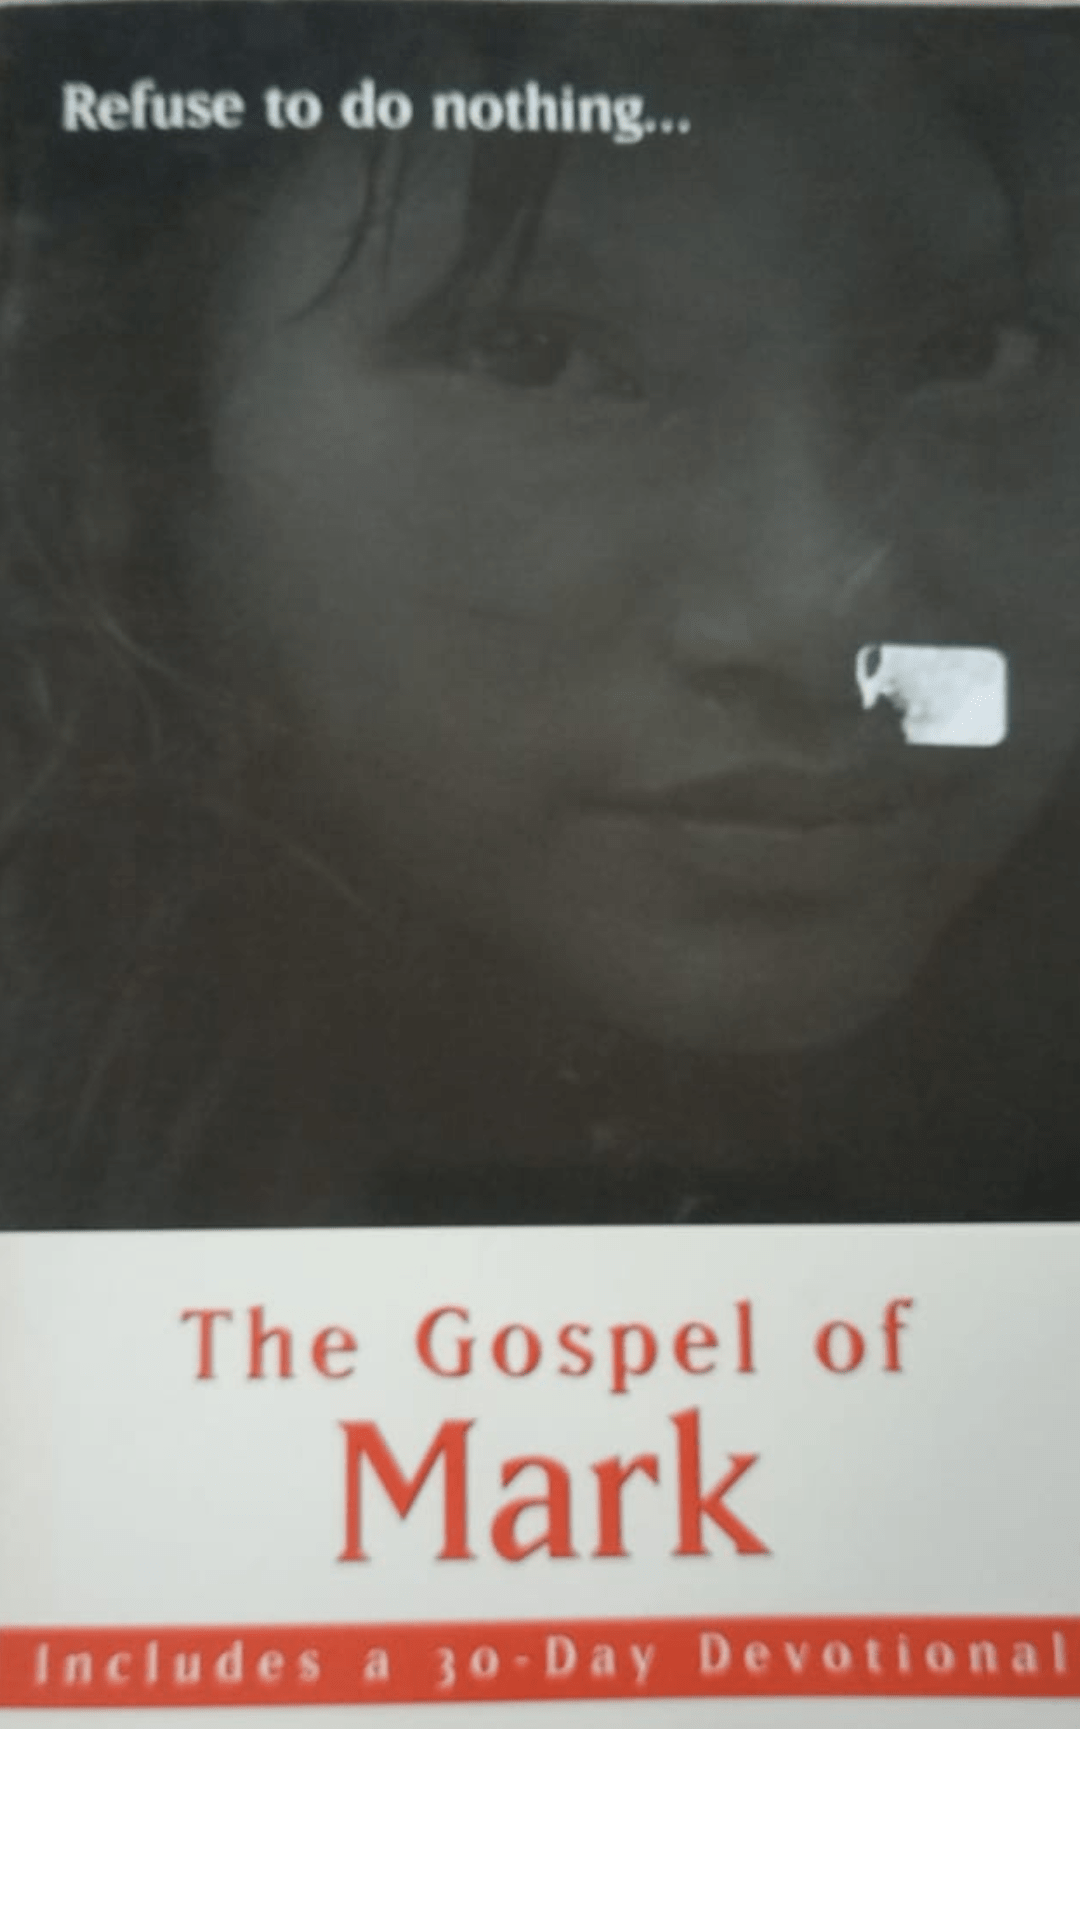 The Gospel of Mark: Includes a 30-Day Devotional